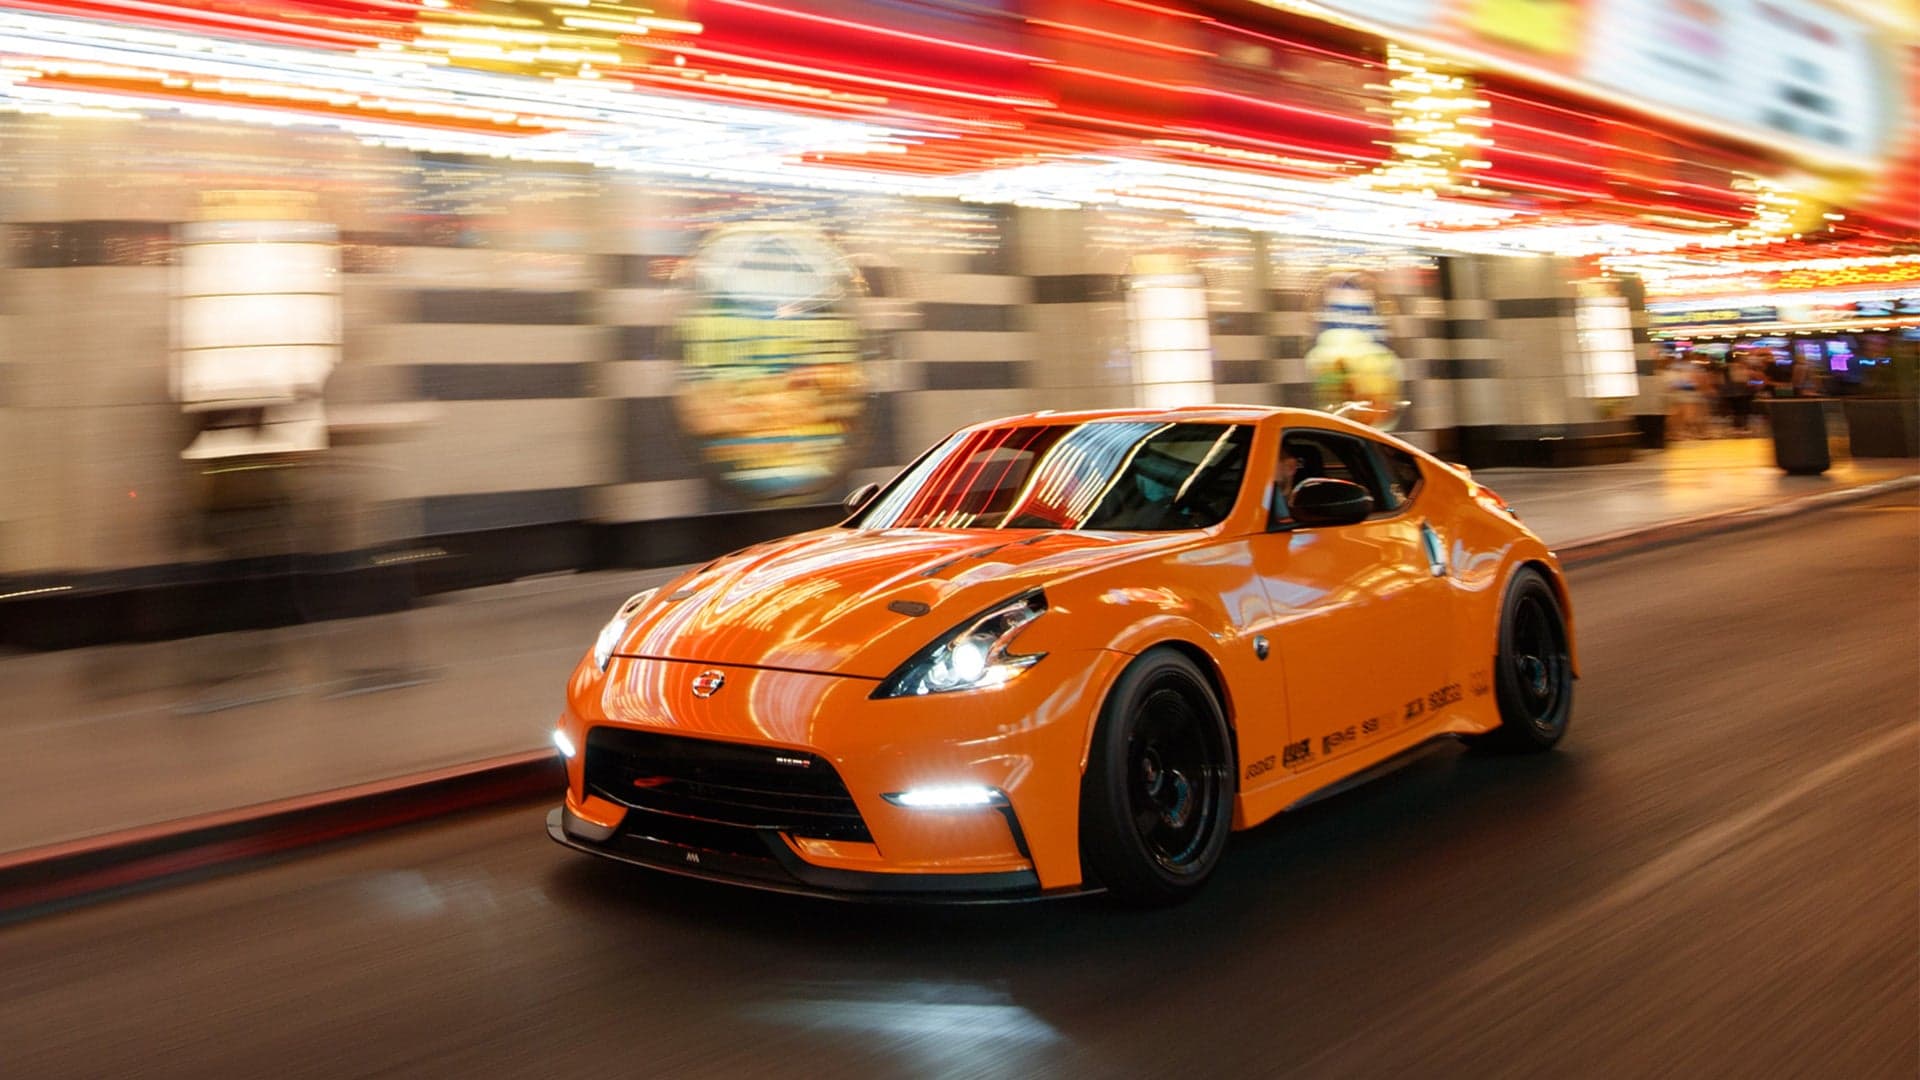 Nissan Shows off 400-Horsepower, Twin-Turbo ‘Project Clubsport 23’ 370Z at SEMA 2018